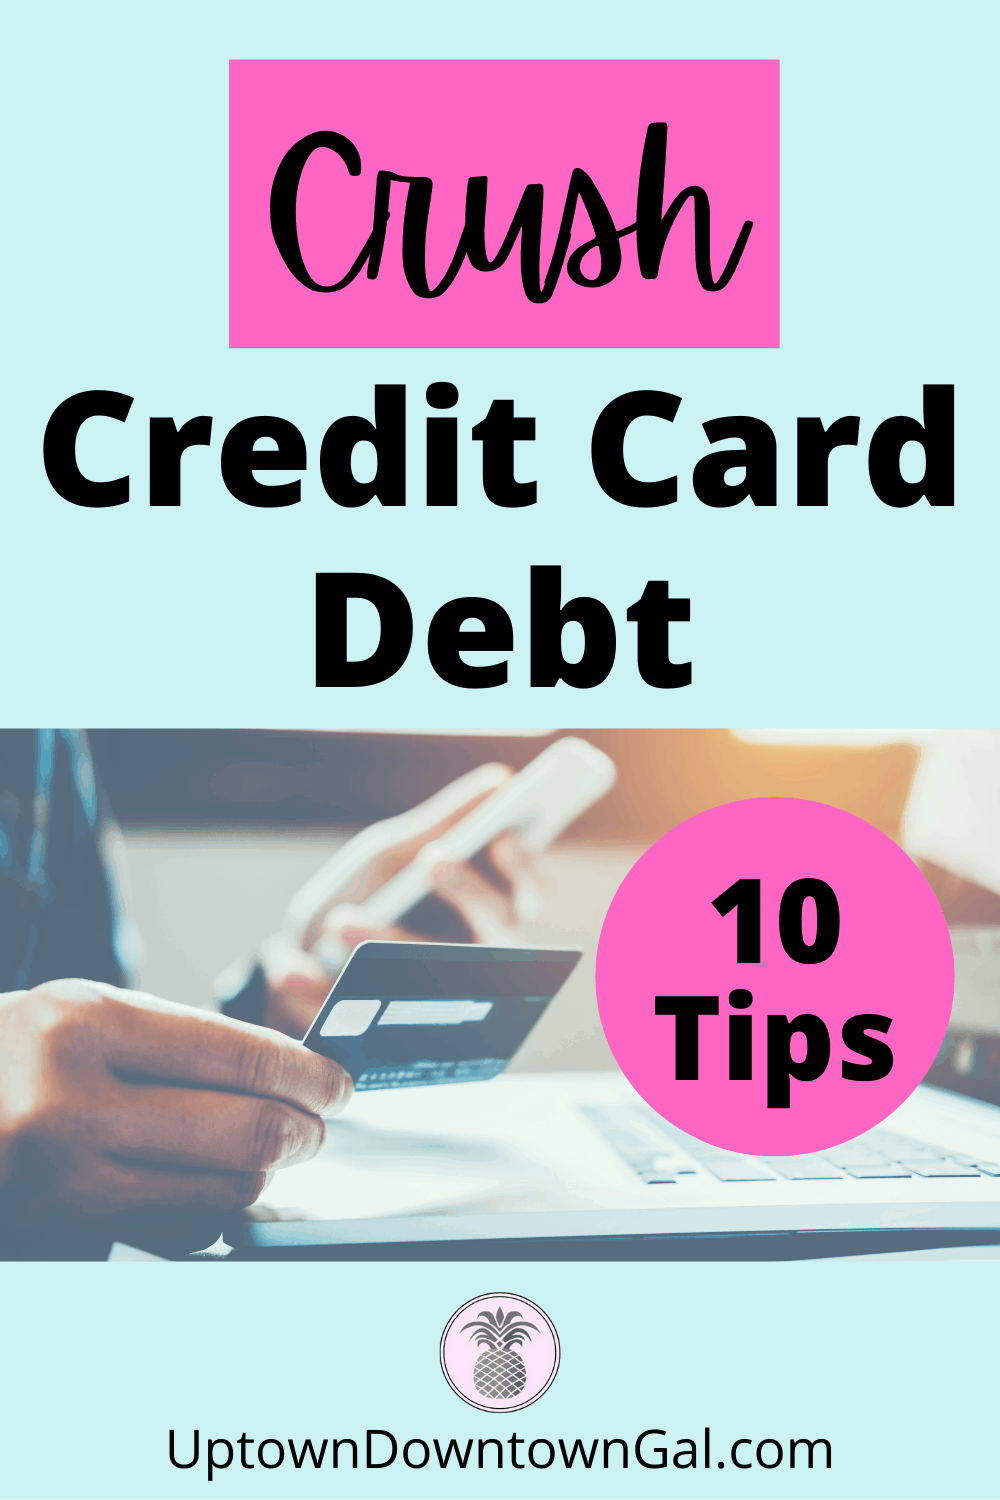 Pay Off Credit Card Debt - 10 Tips